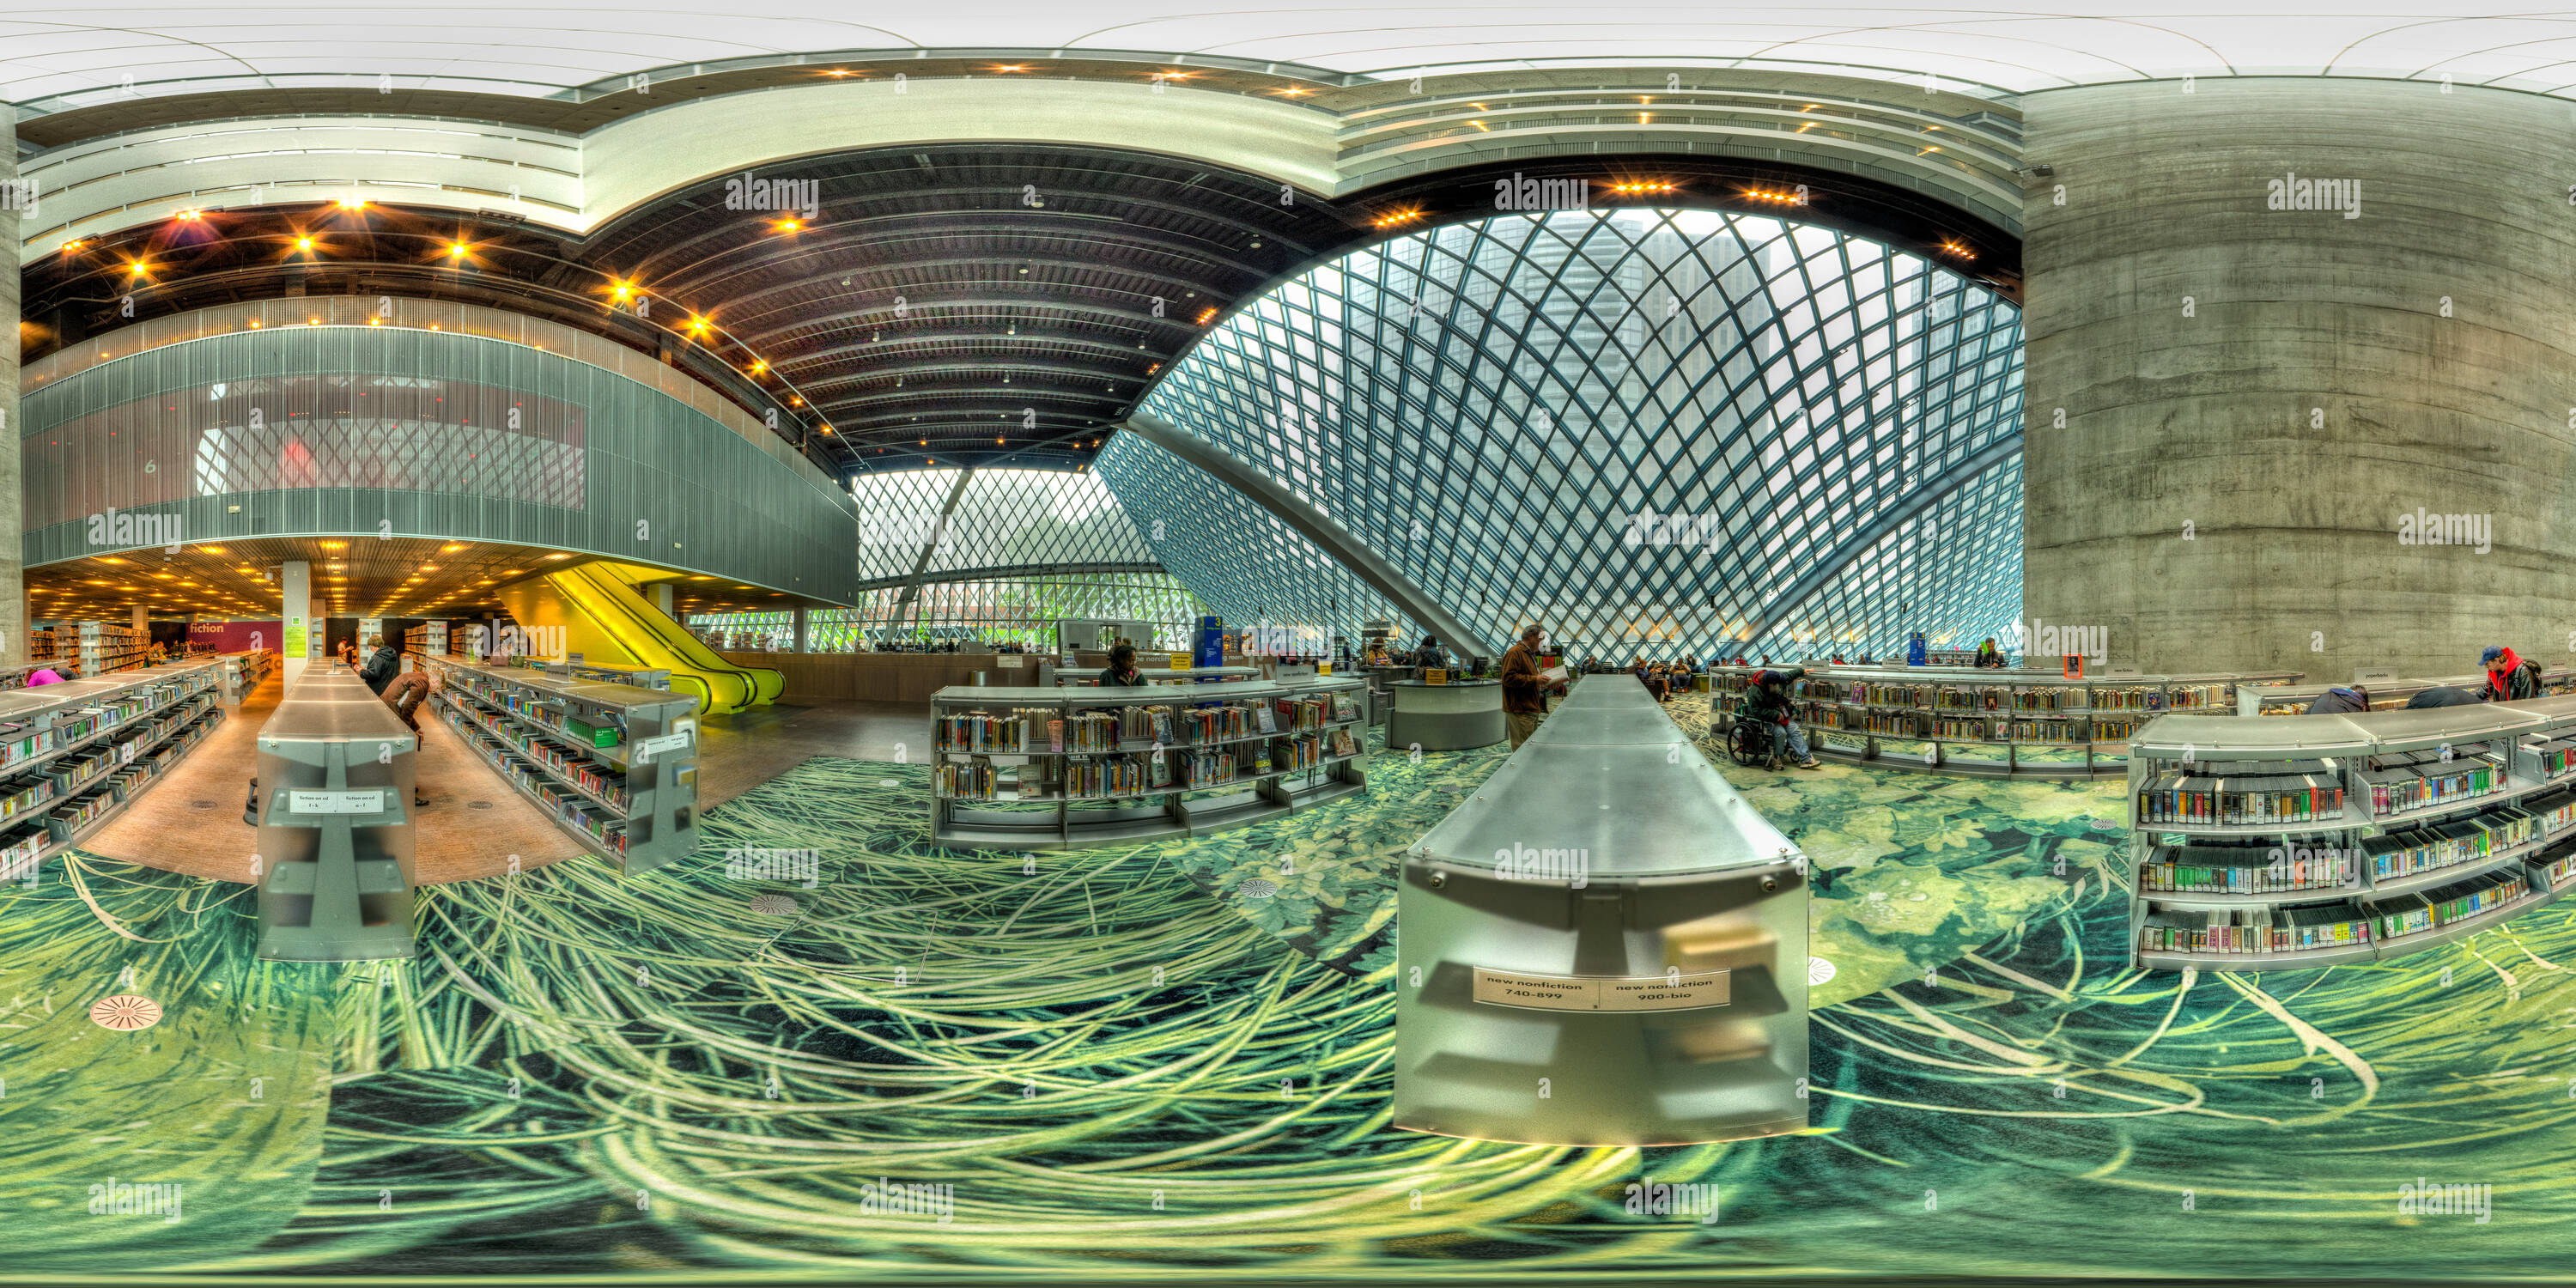 360 degree panoramic view of Seattle Central Library “Living Room” space, Seattle WA